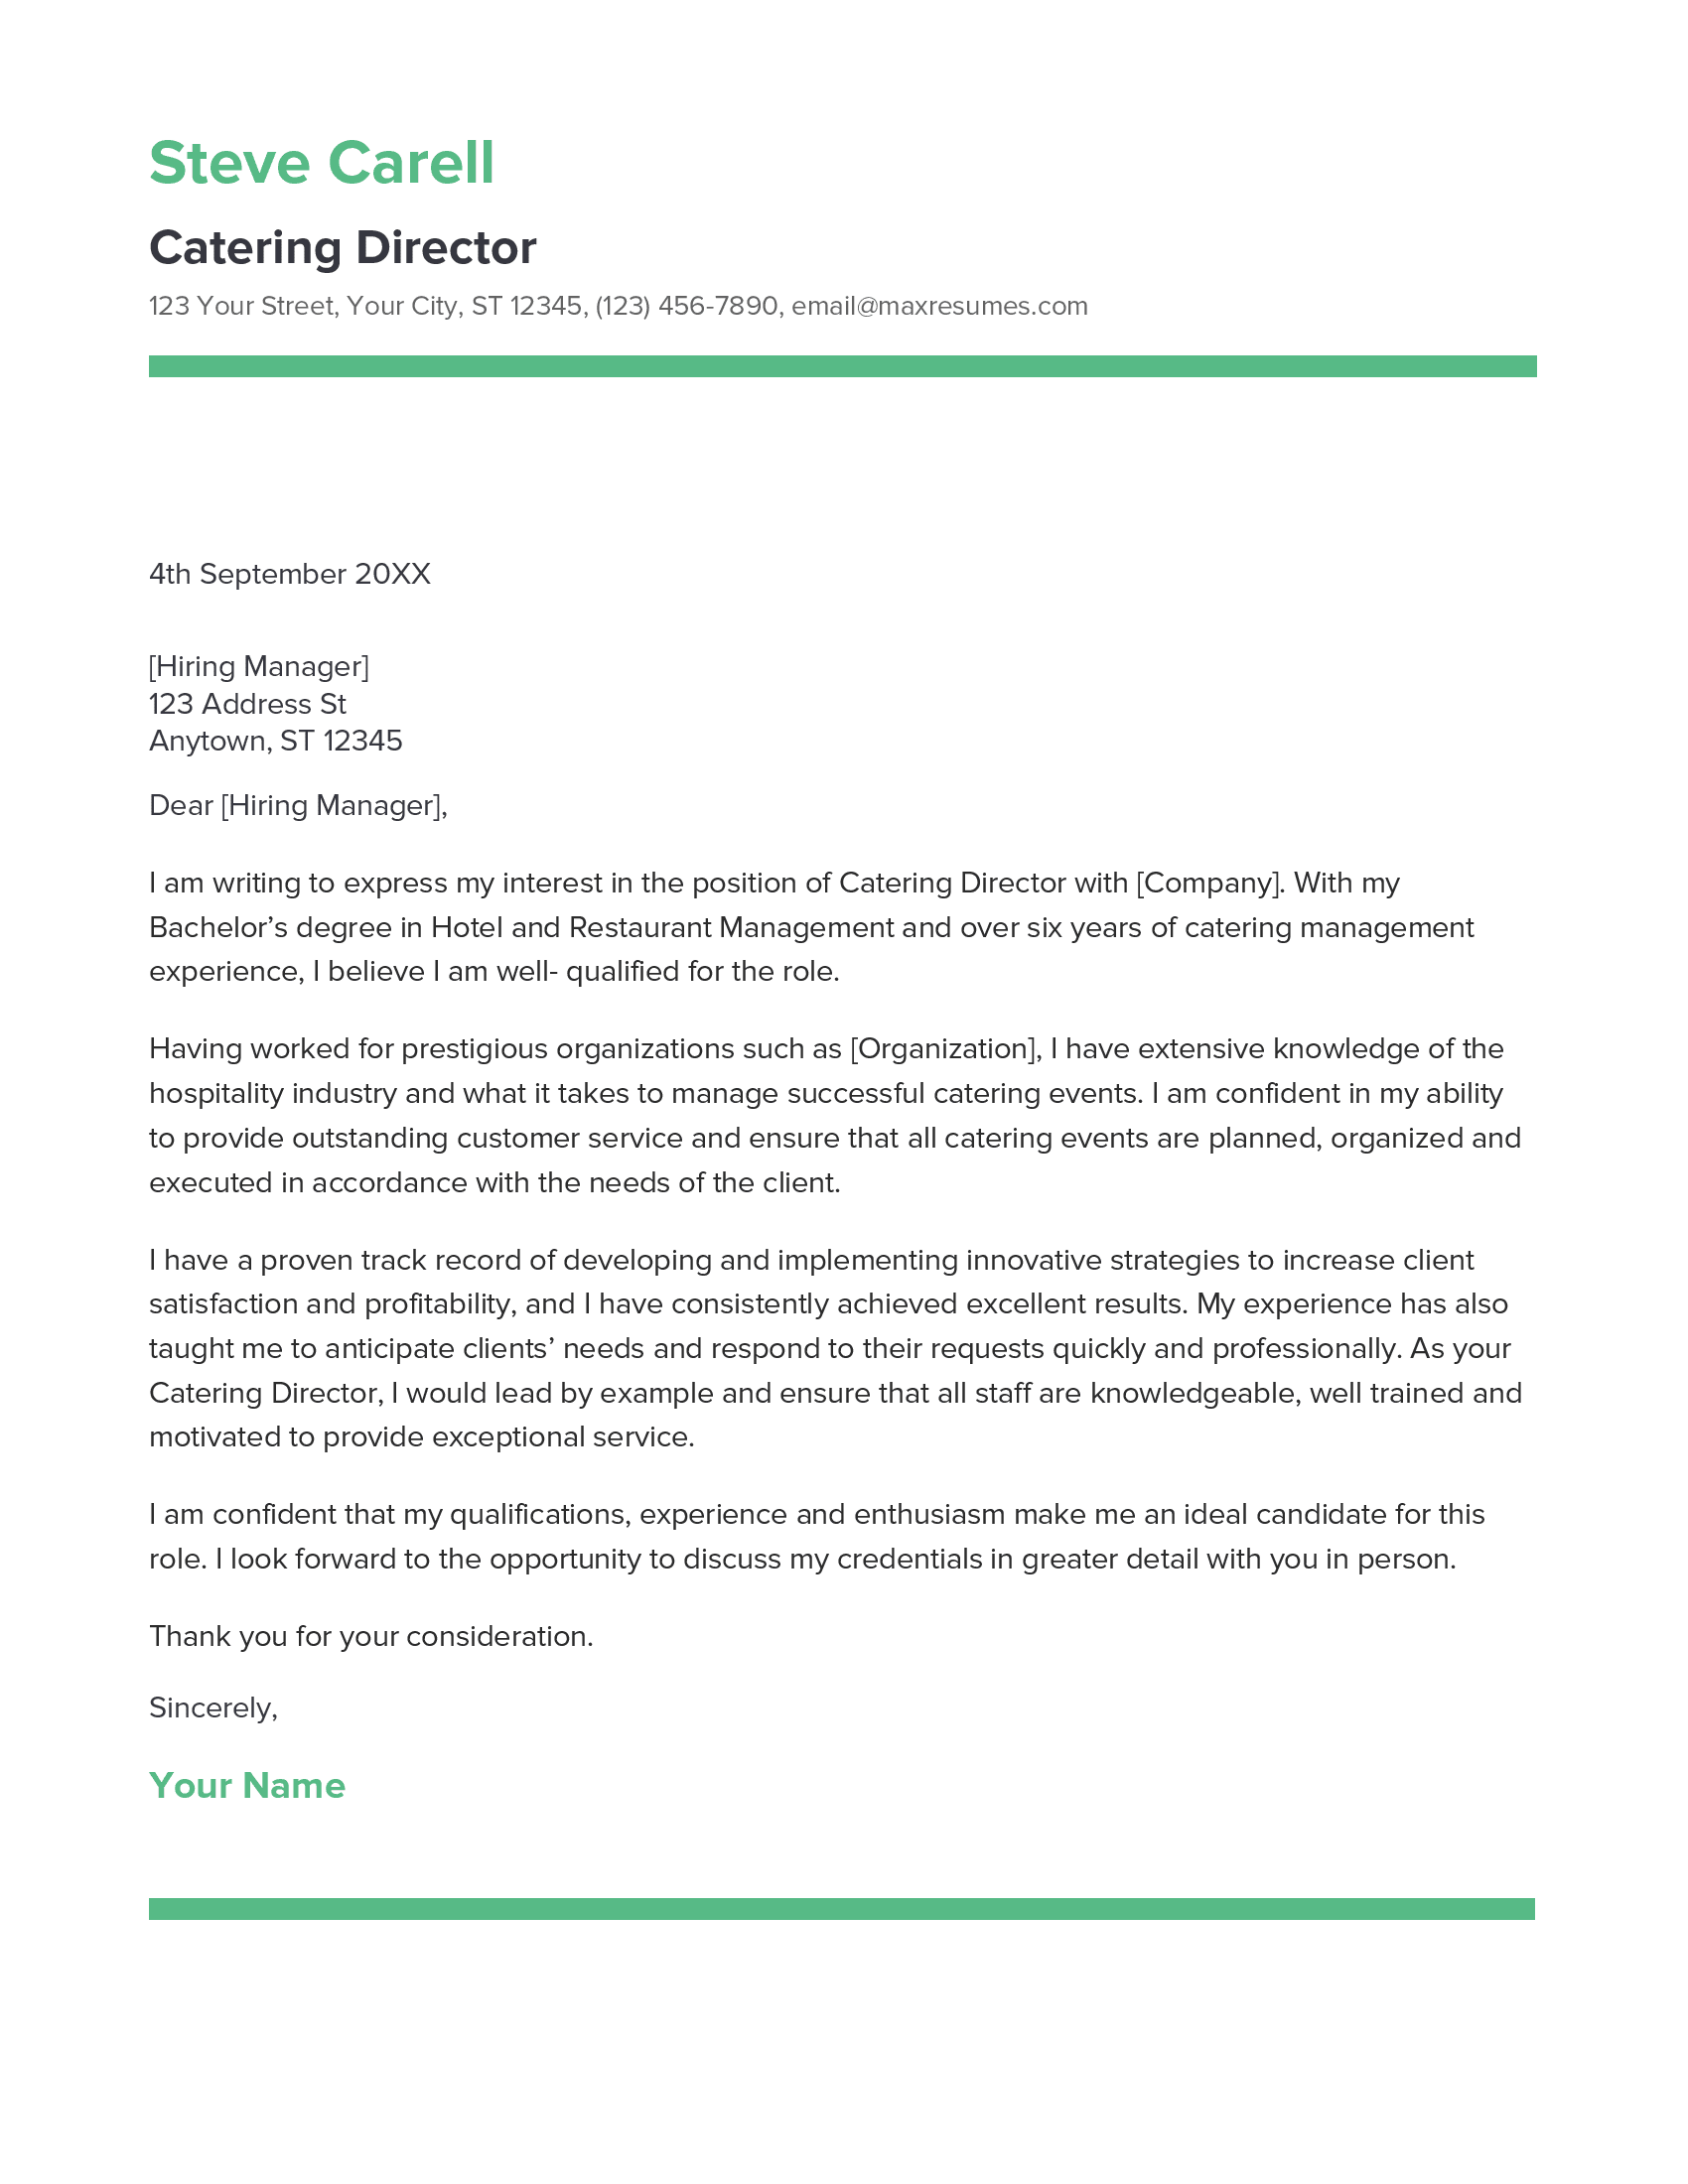 Catering Director Cover Letter Example